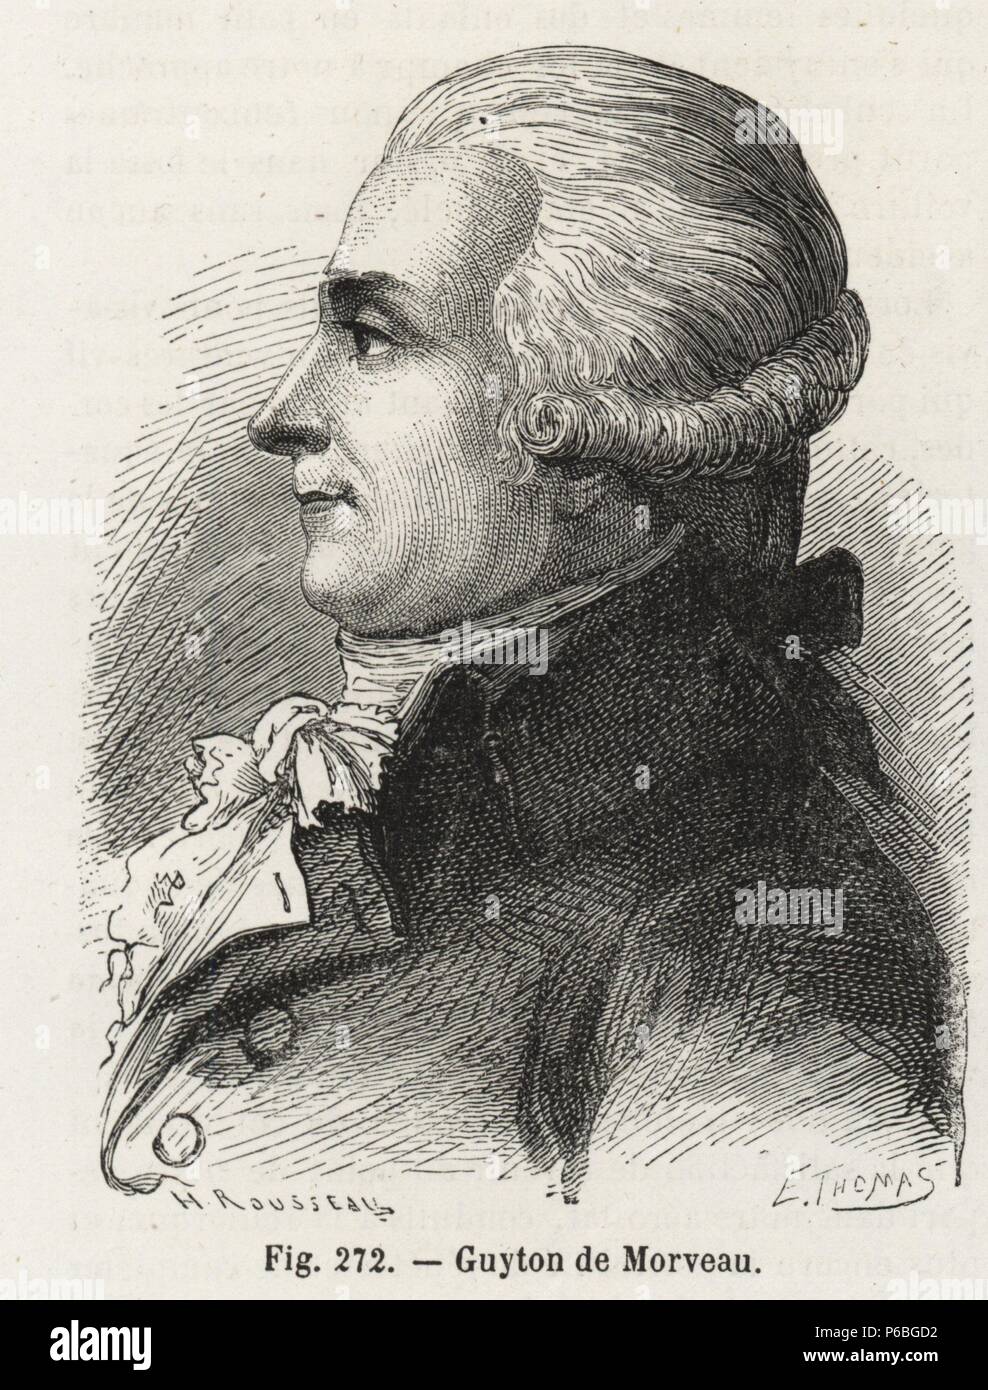 Louis-Bernard Guyton de Morveau, leader of a corps of balloonists for the French Revolutionary Army. Woodblock engraving by H. Rousseau after E. Thomas from Louis Figuier's 'Les Merveilles de la Science: Aerostats' (Marvels of Science: Air Balloons), Furne, Jouvet et Cie, Paris, 1868. Stock Photo